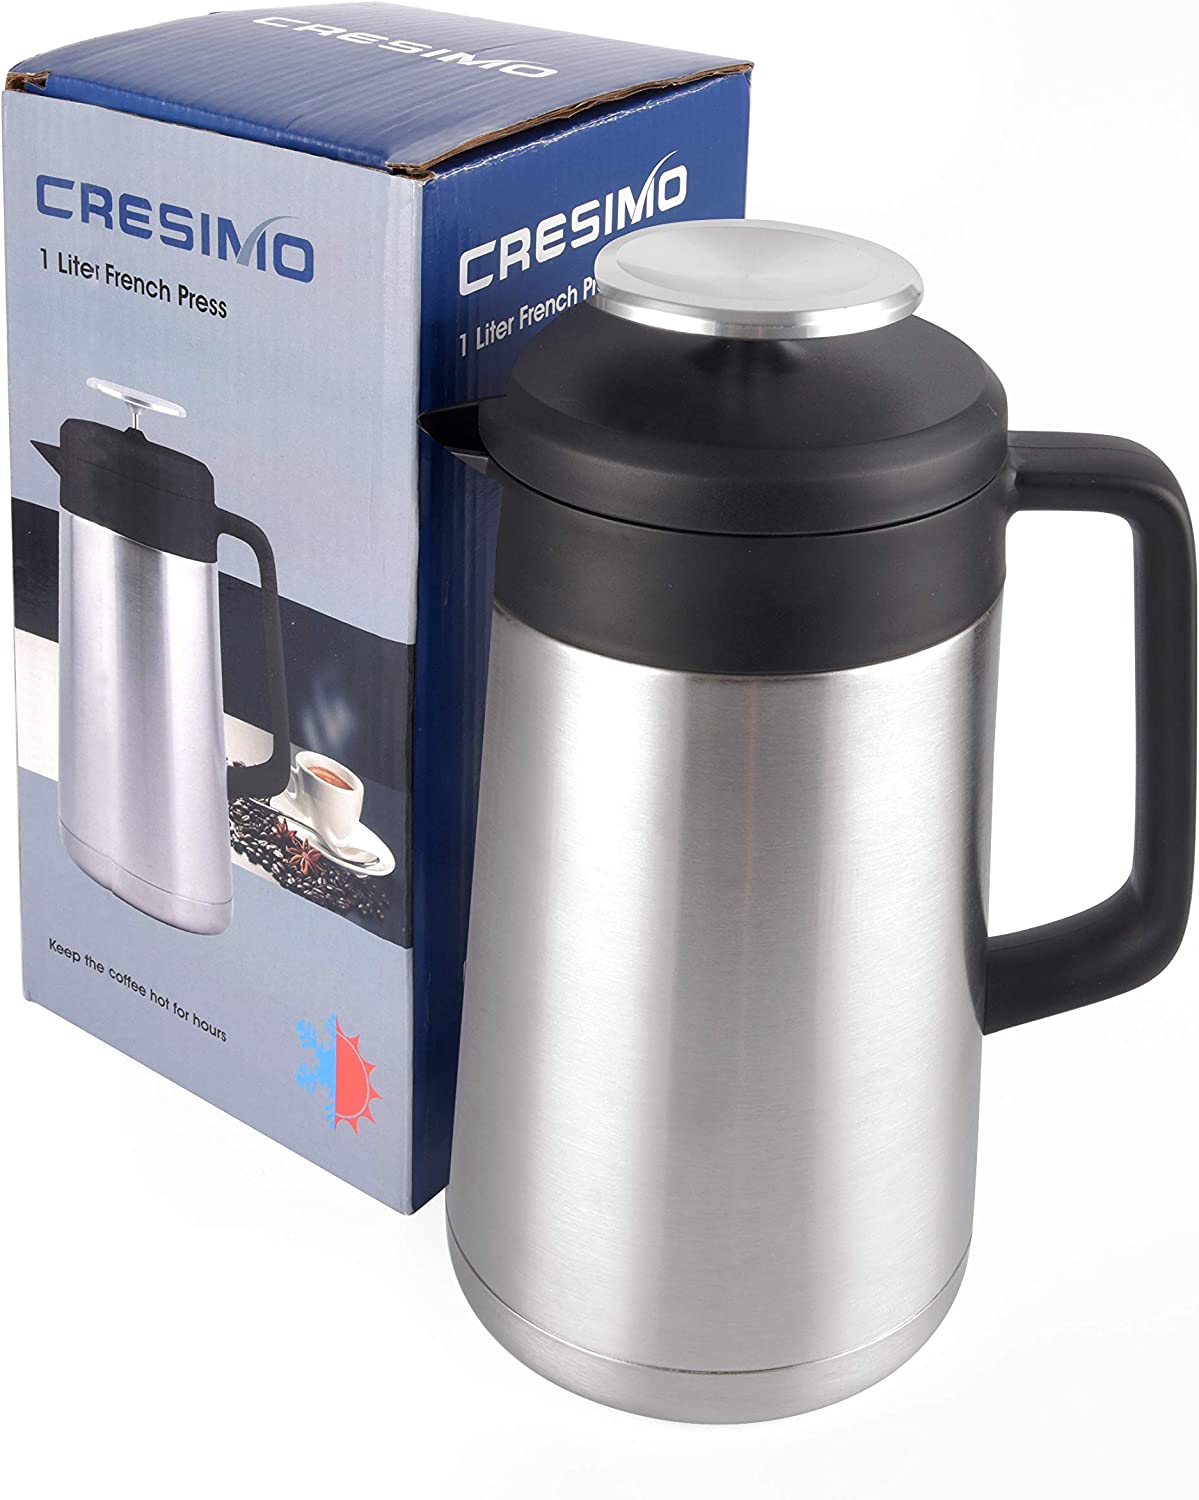 1L Thermal Coffee Carafe 34oz Double Walled Vacuum Flask Stainless